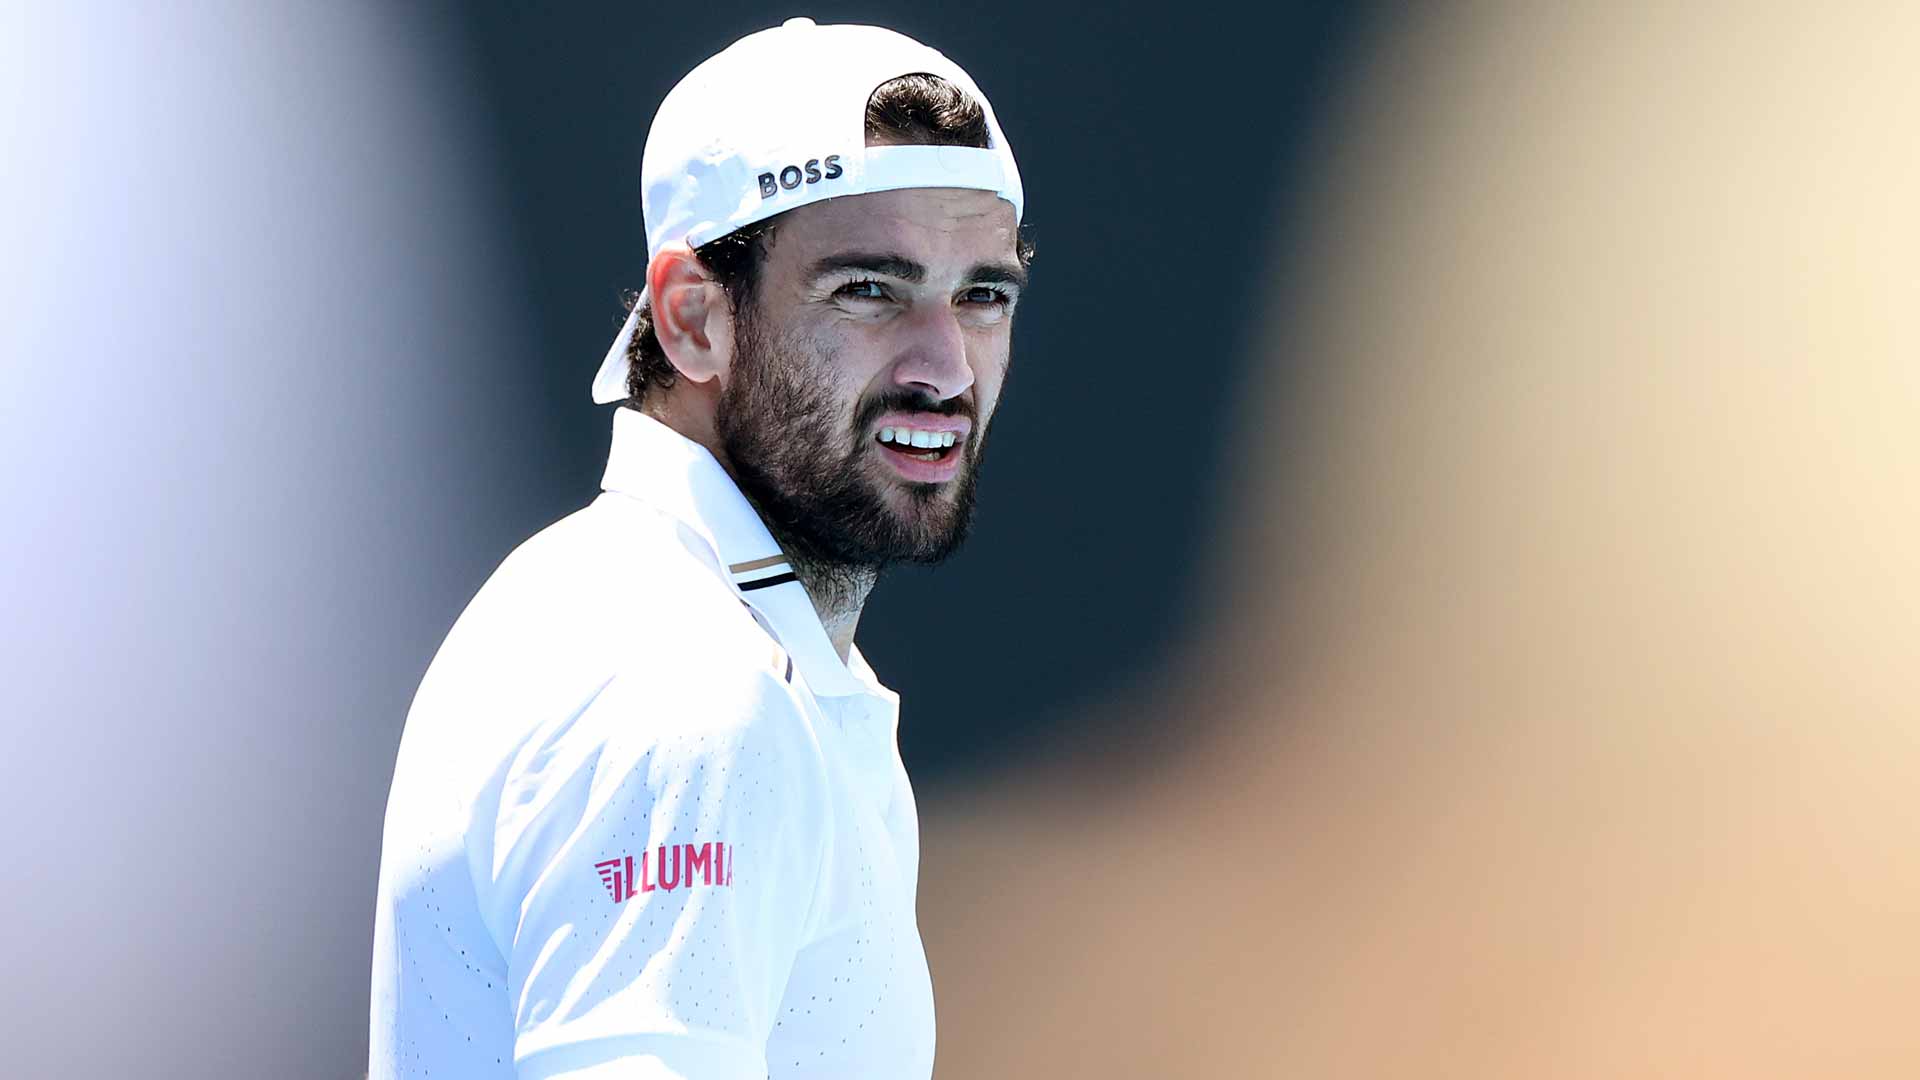 Matteo Berrettini has not competed since the Australian Open.